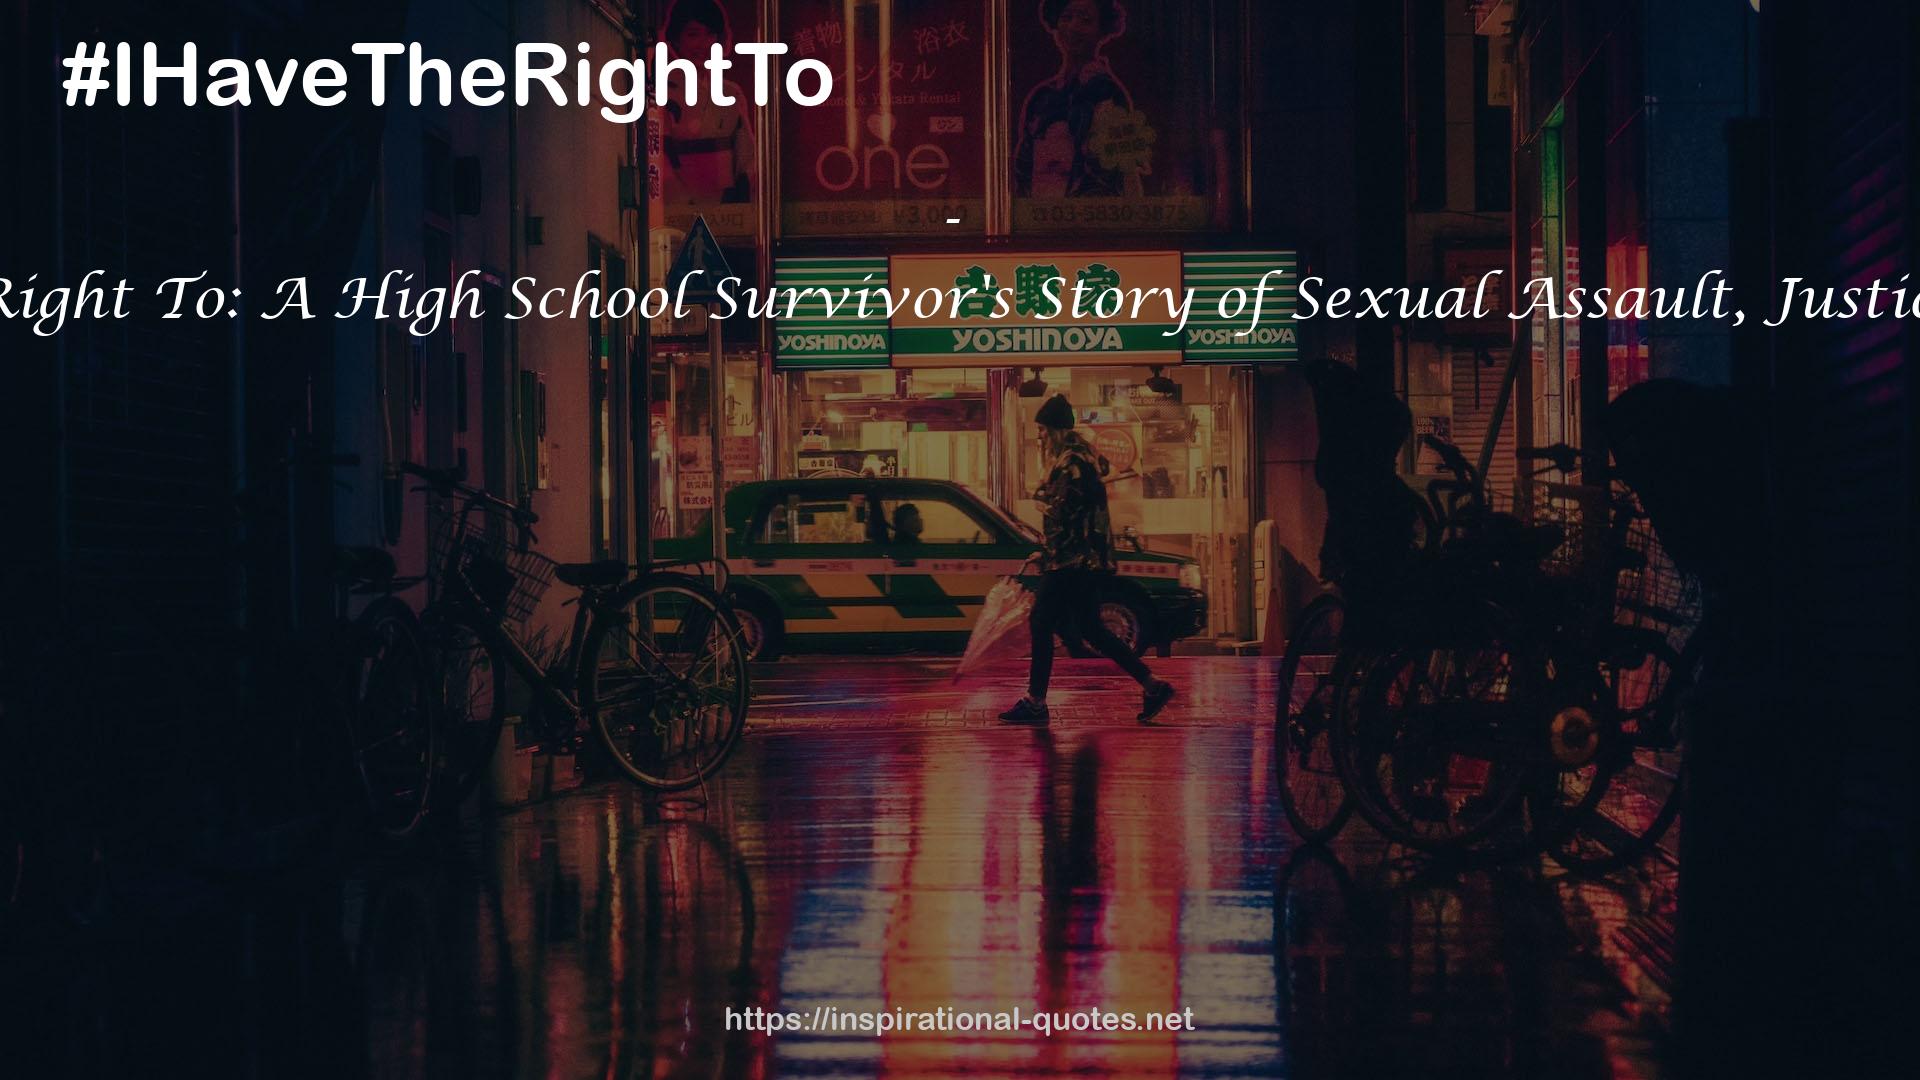 I Have the Right To: A High School Survivor's Story of Sexual Assault, Justice, and Hope QUOTES